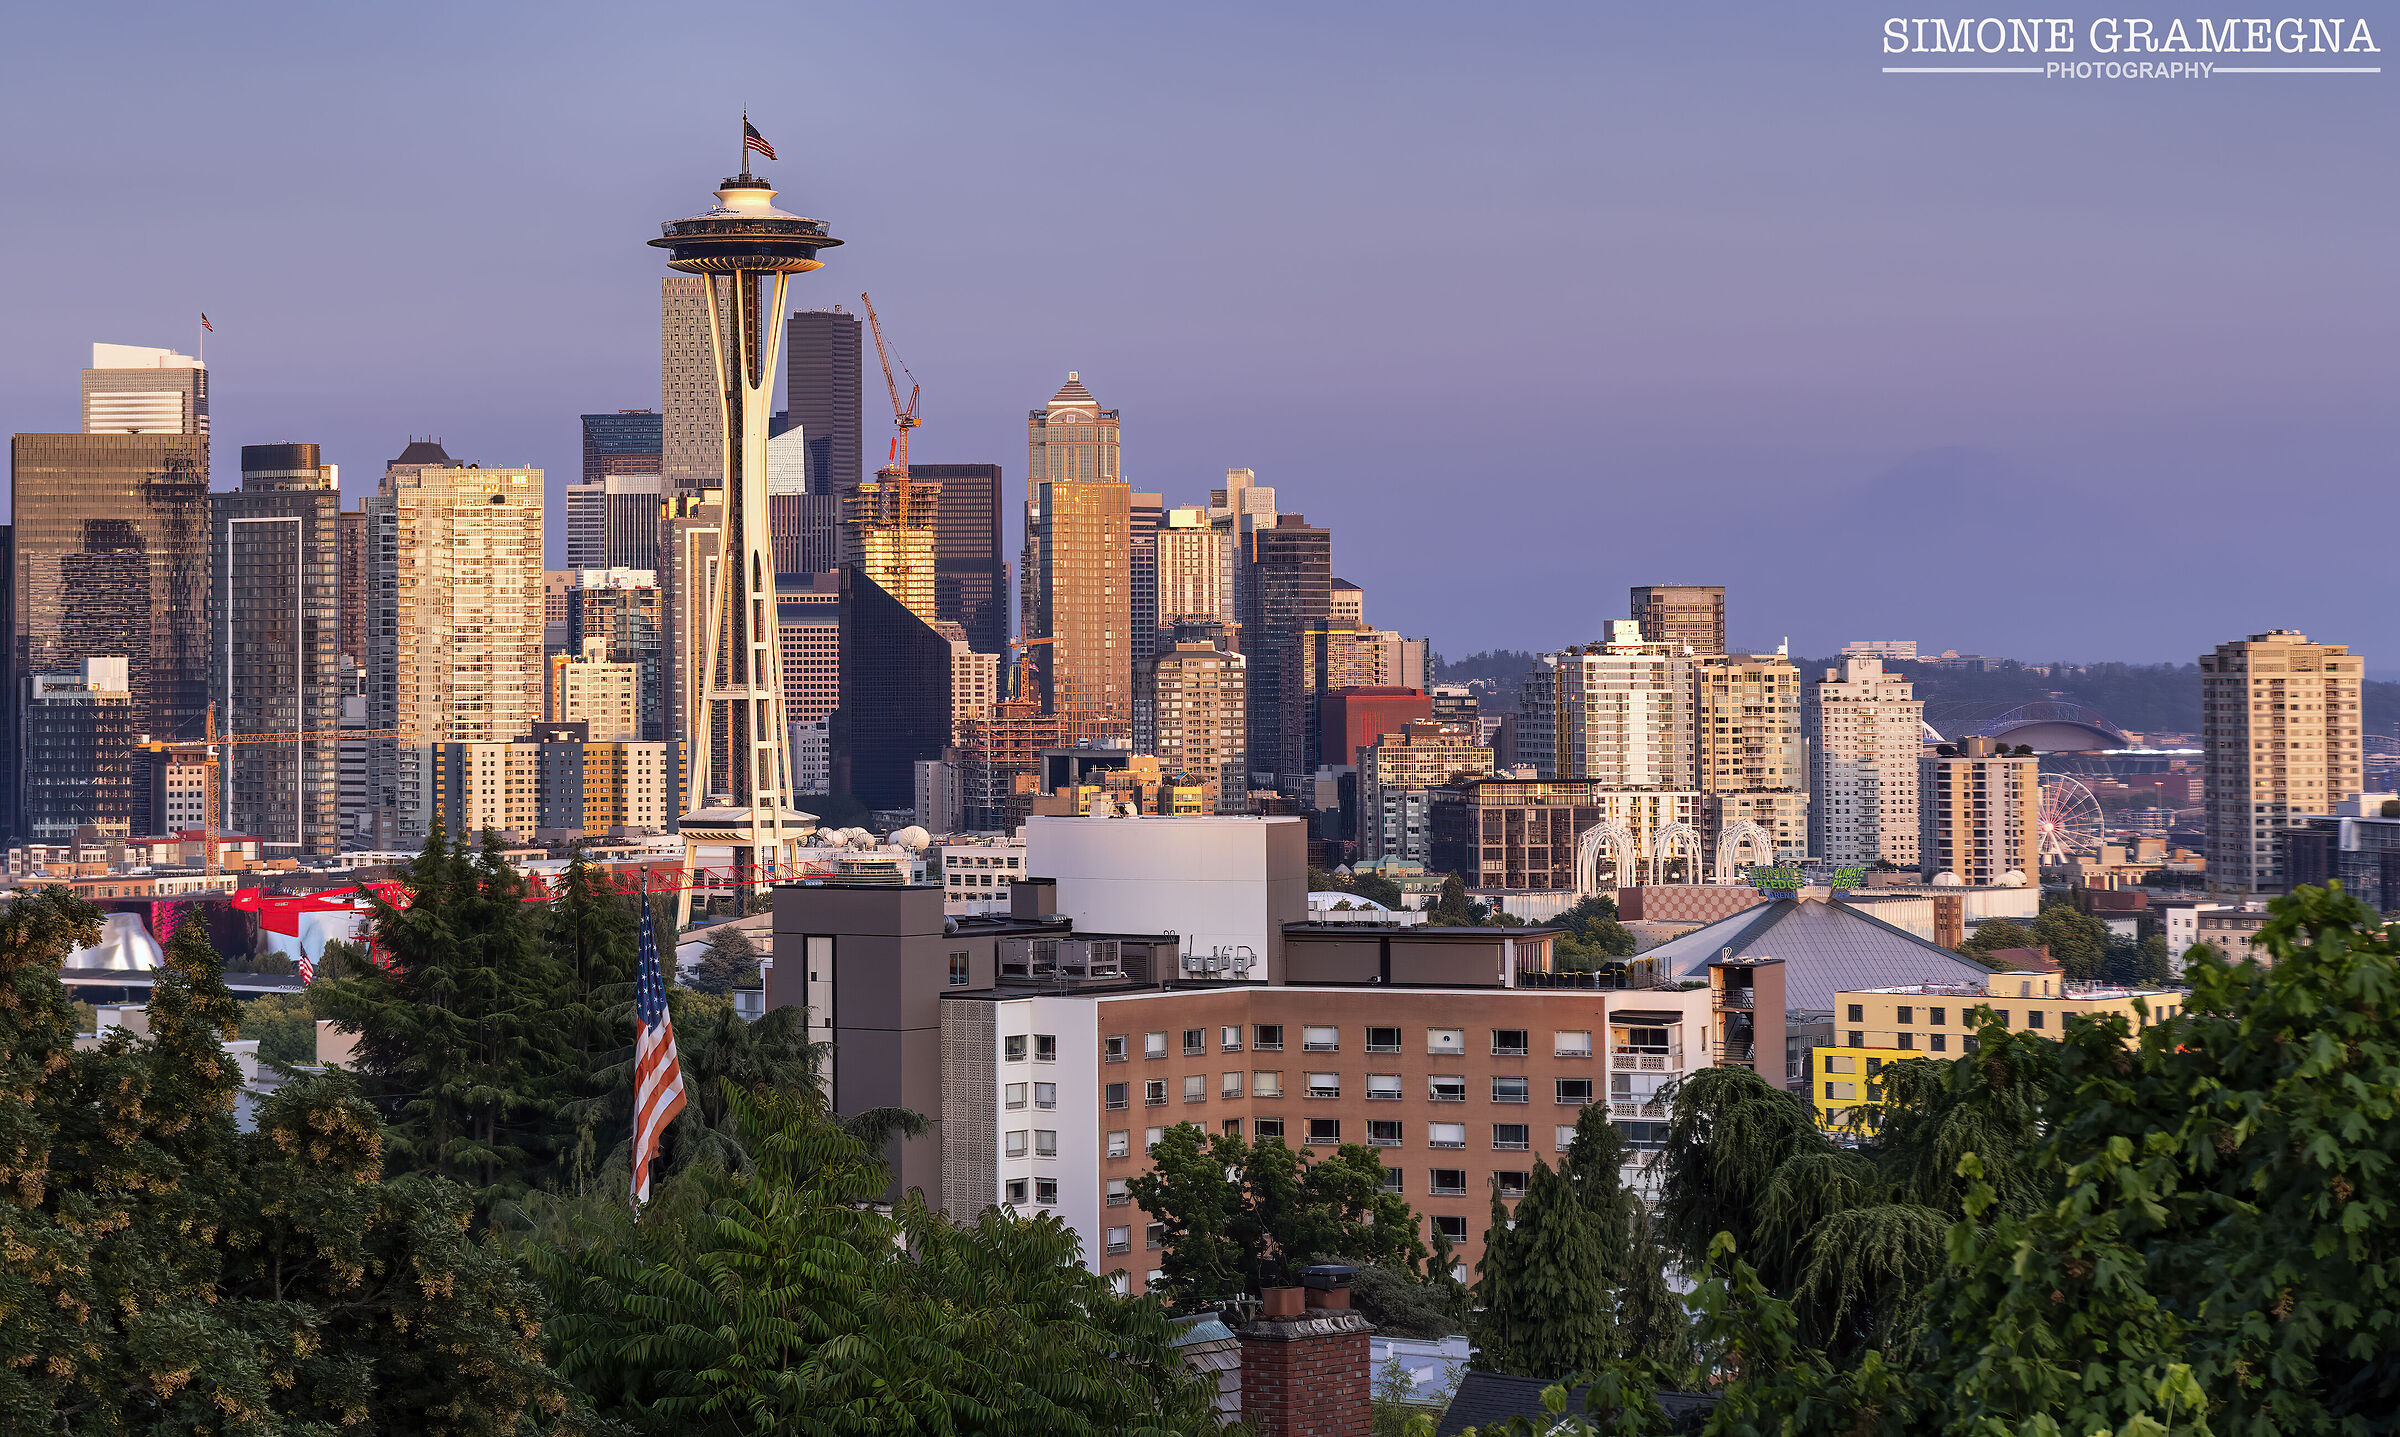 Seattle's view from Kerry Park...